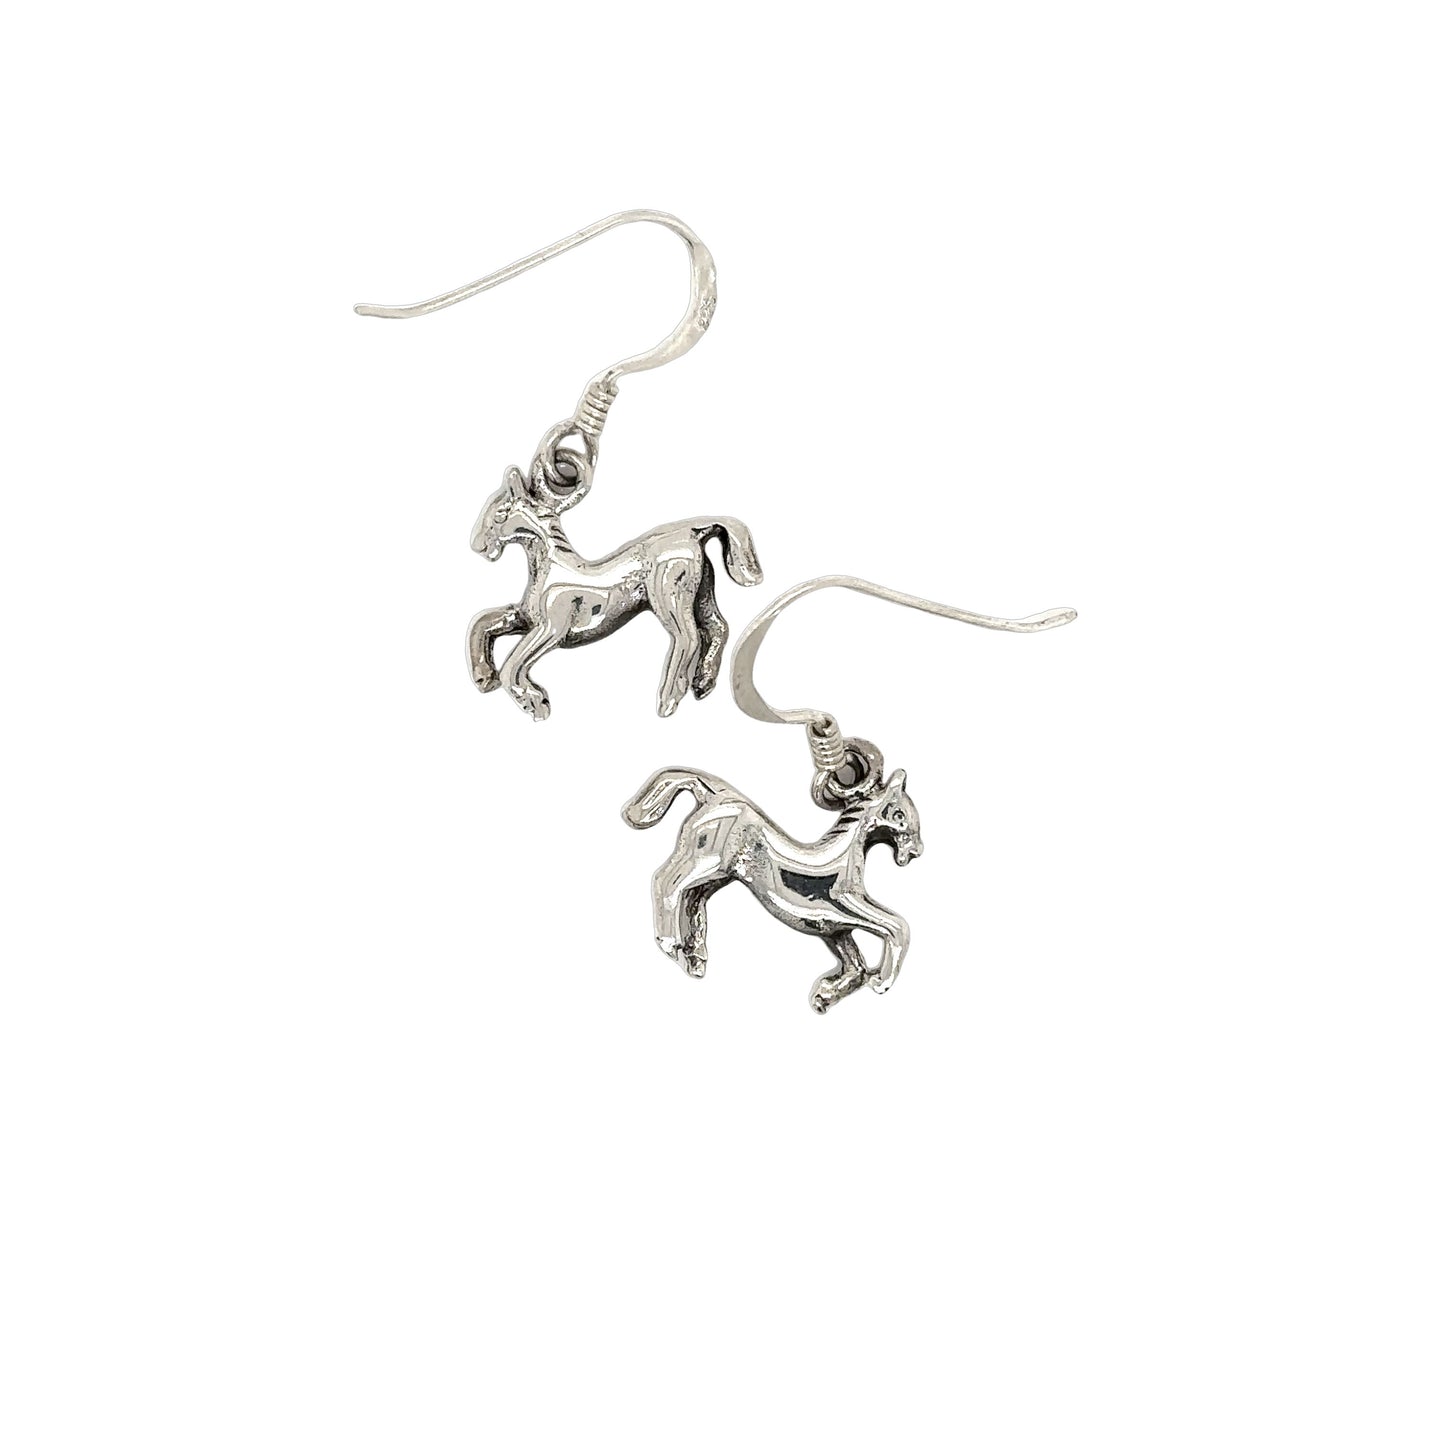 A pair of Super Silver Horse Earrings on a white background, perfect for horse lovers.